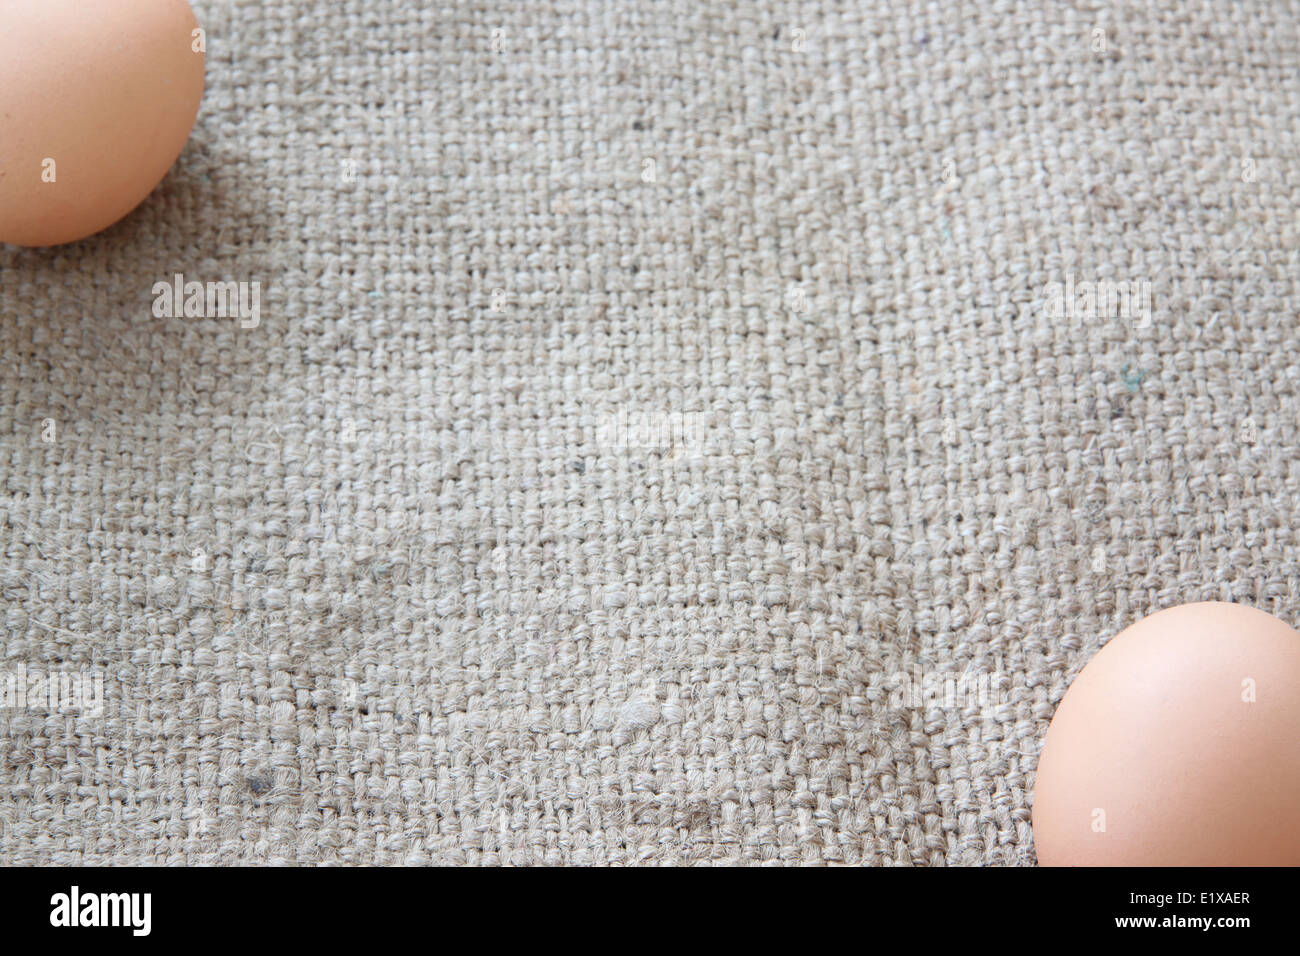 Focus eggs on sackcloth of background. Stock Photo